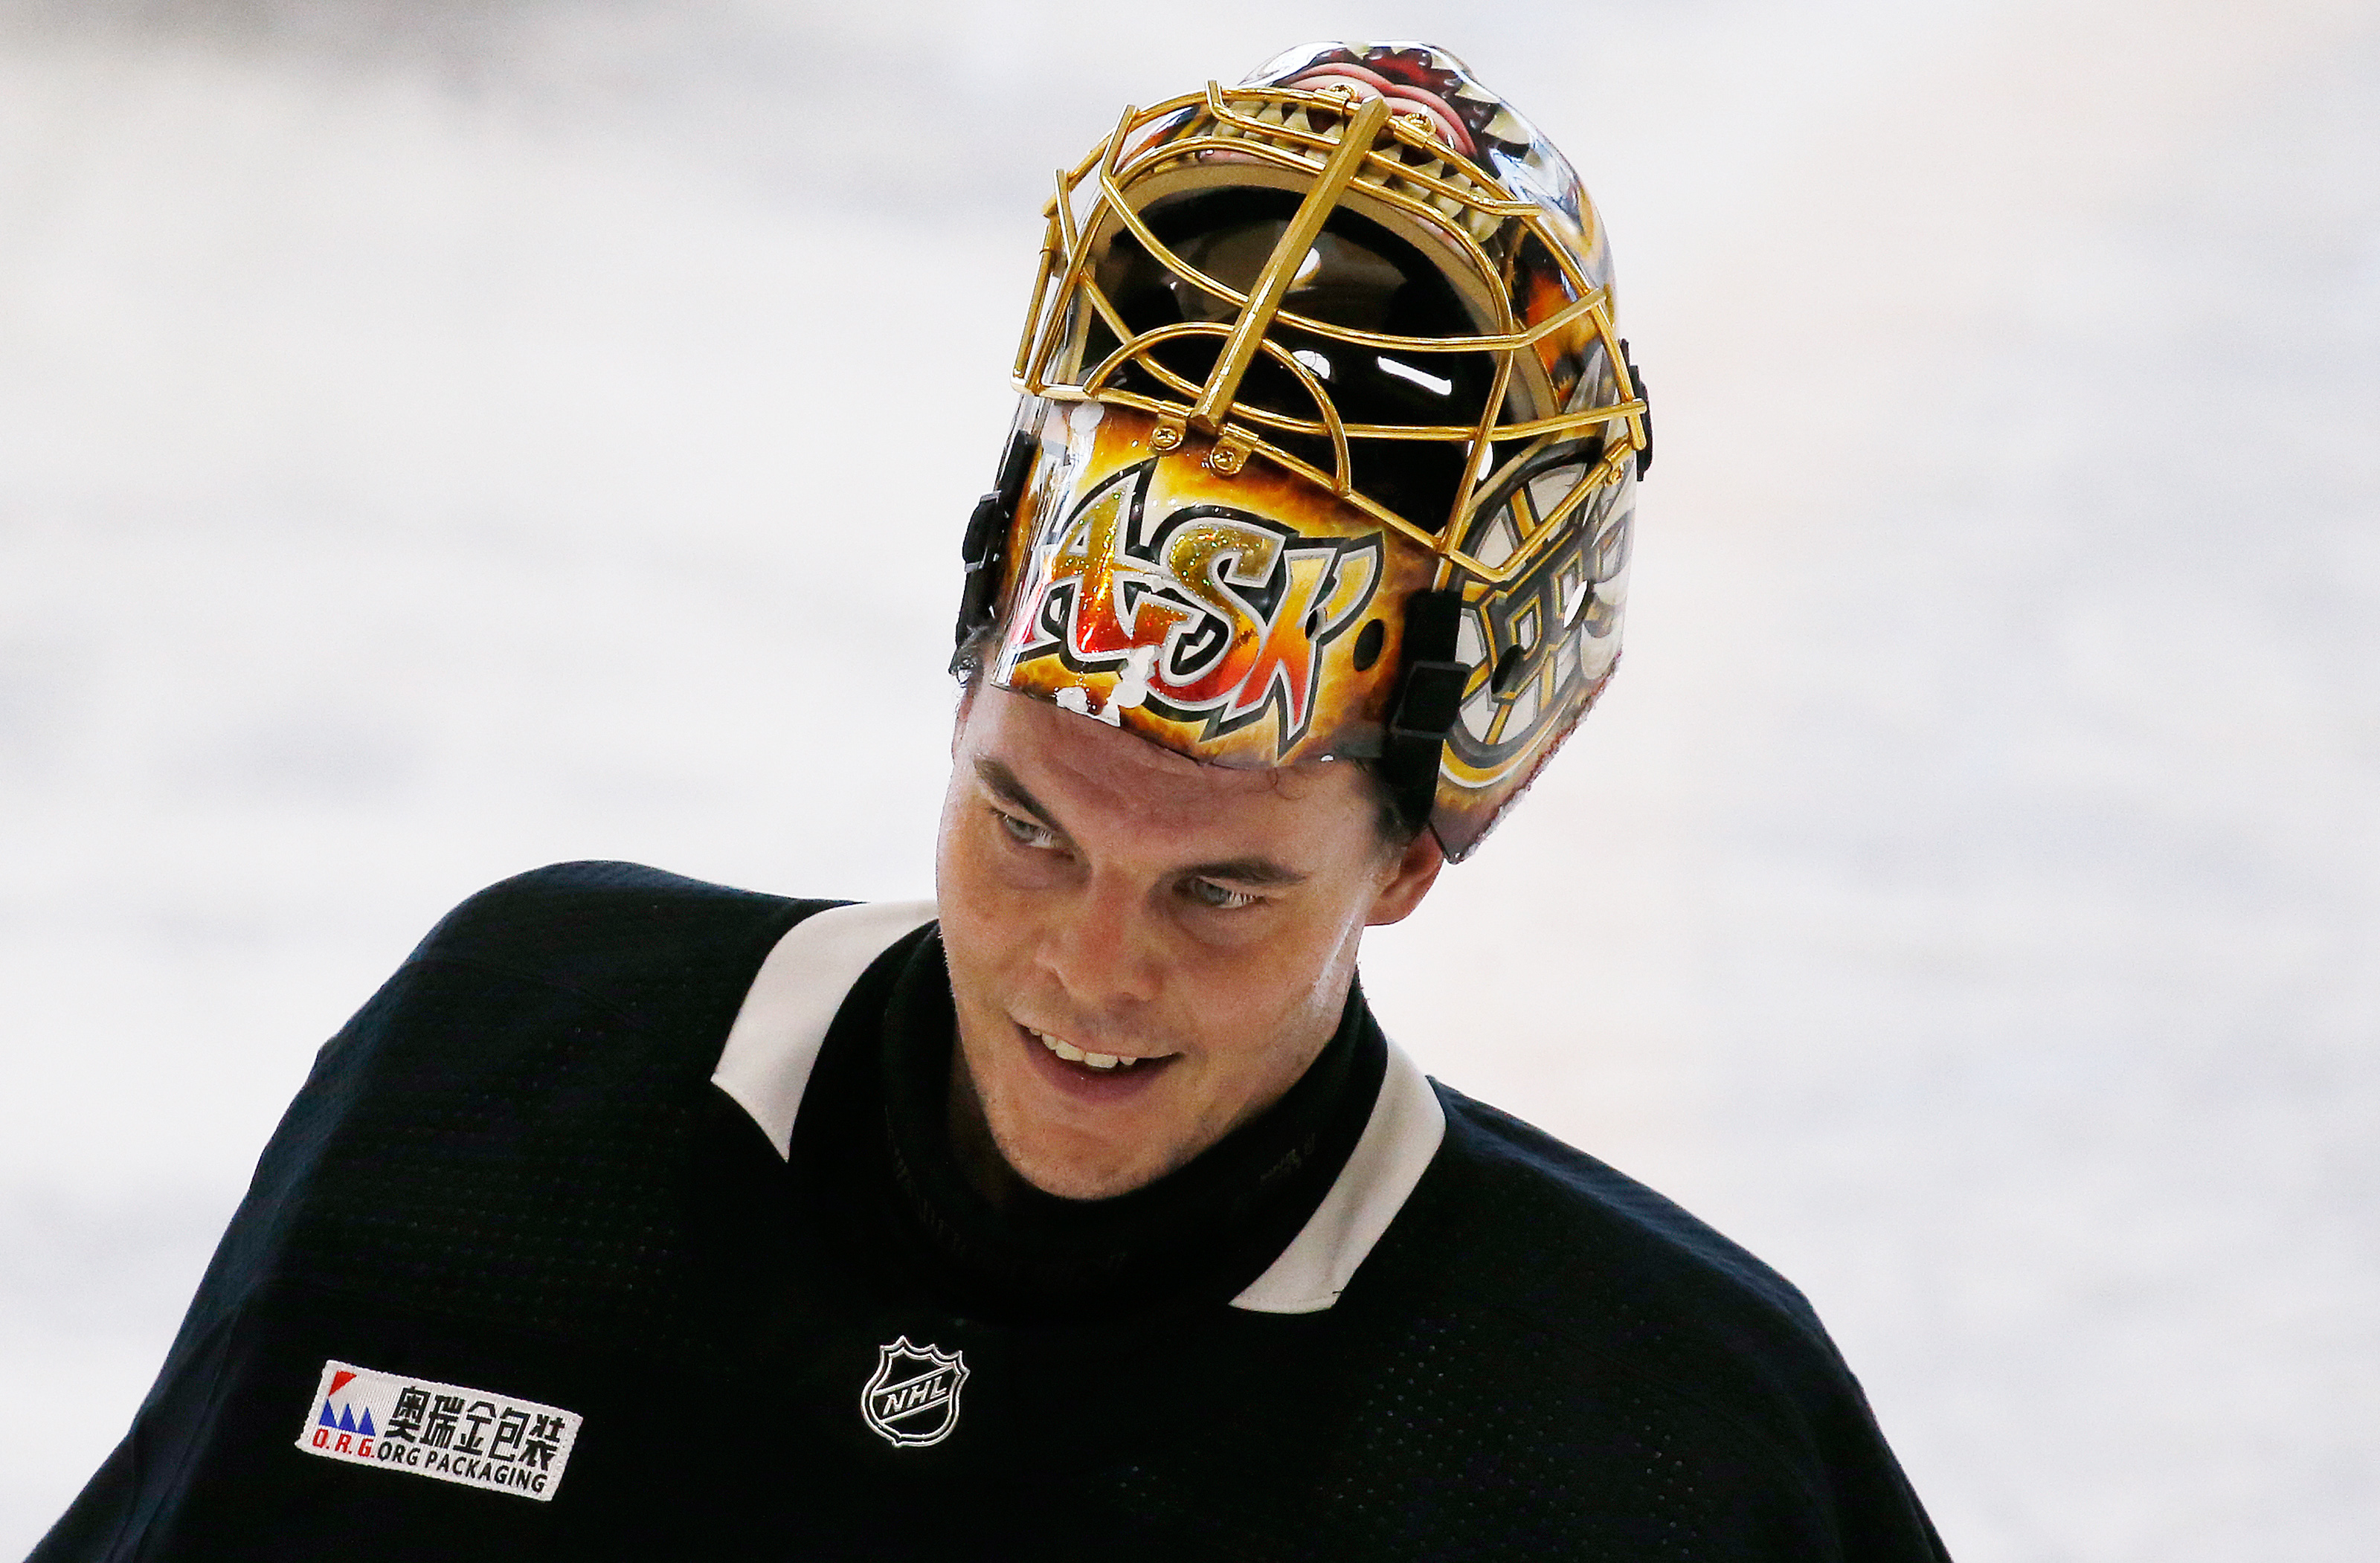 Bruins' Rask returns to team after taking personal leave of absence